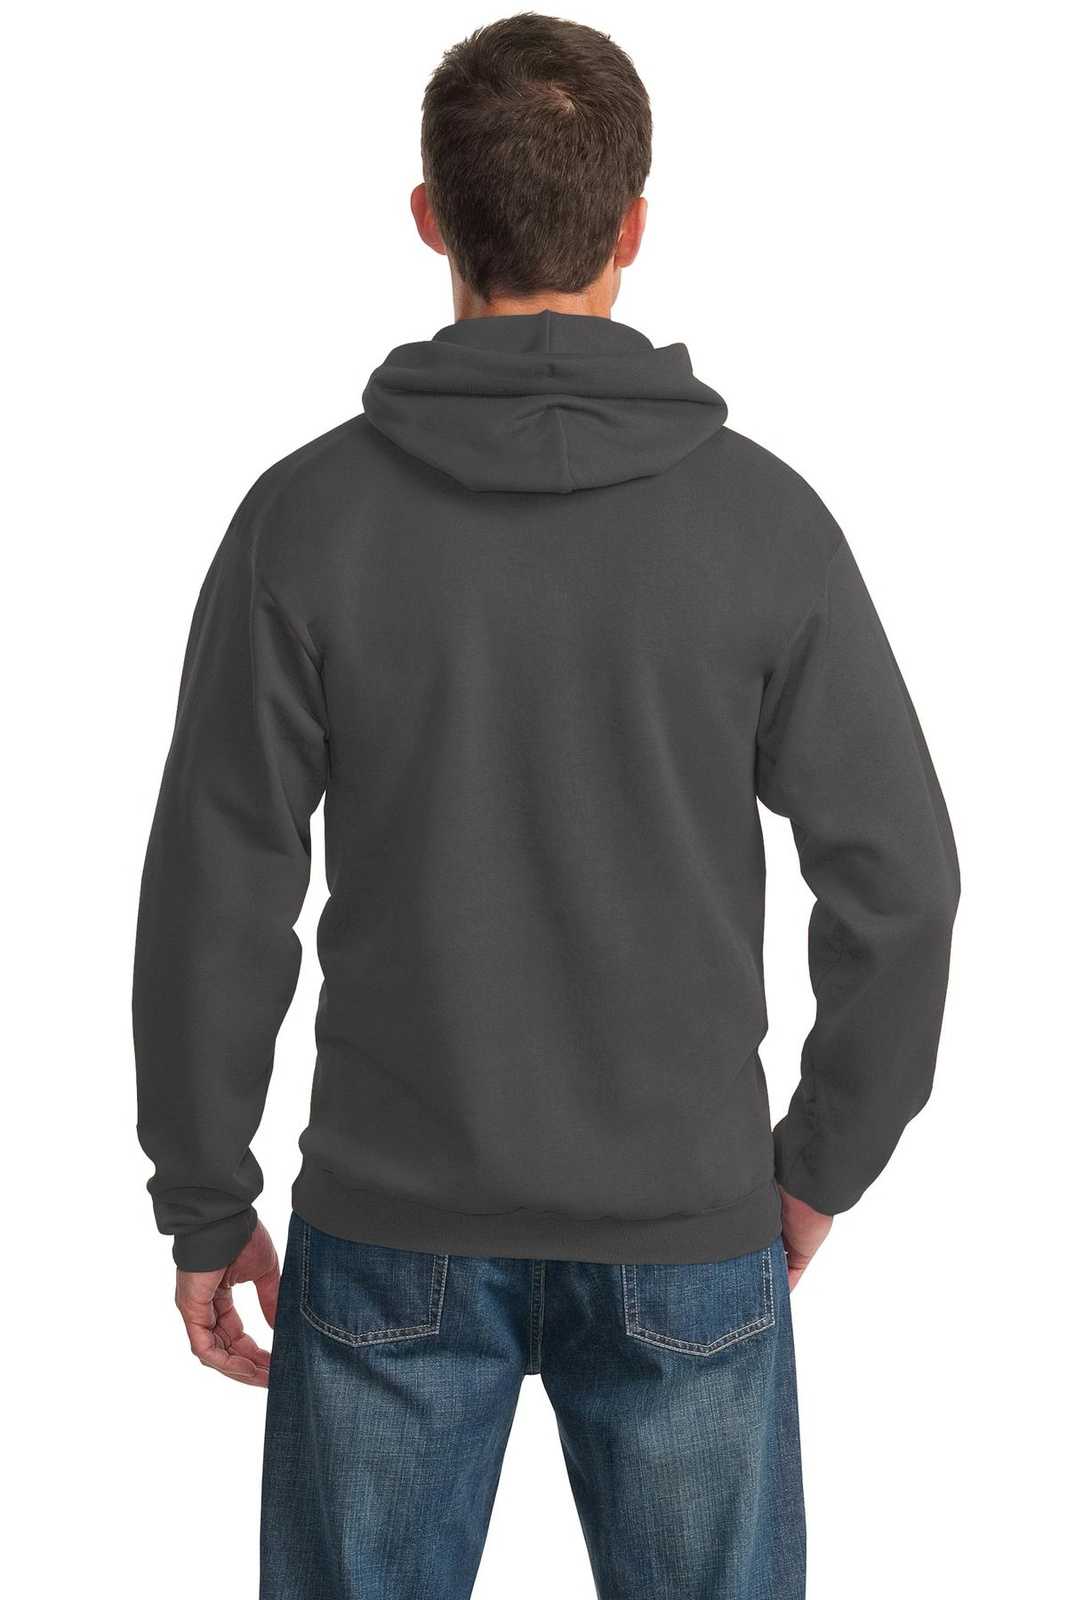 Port & Company PC90H Essential Fleece Pullover Hooded Sweatshirt - Charcoal - HIT a Double - 1